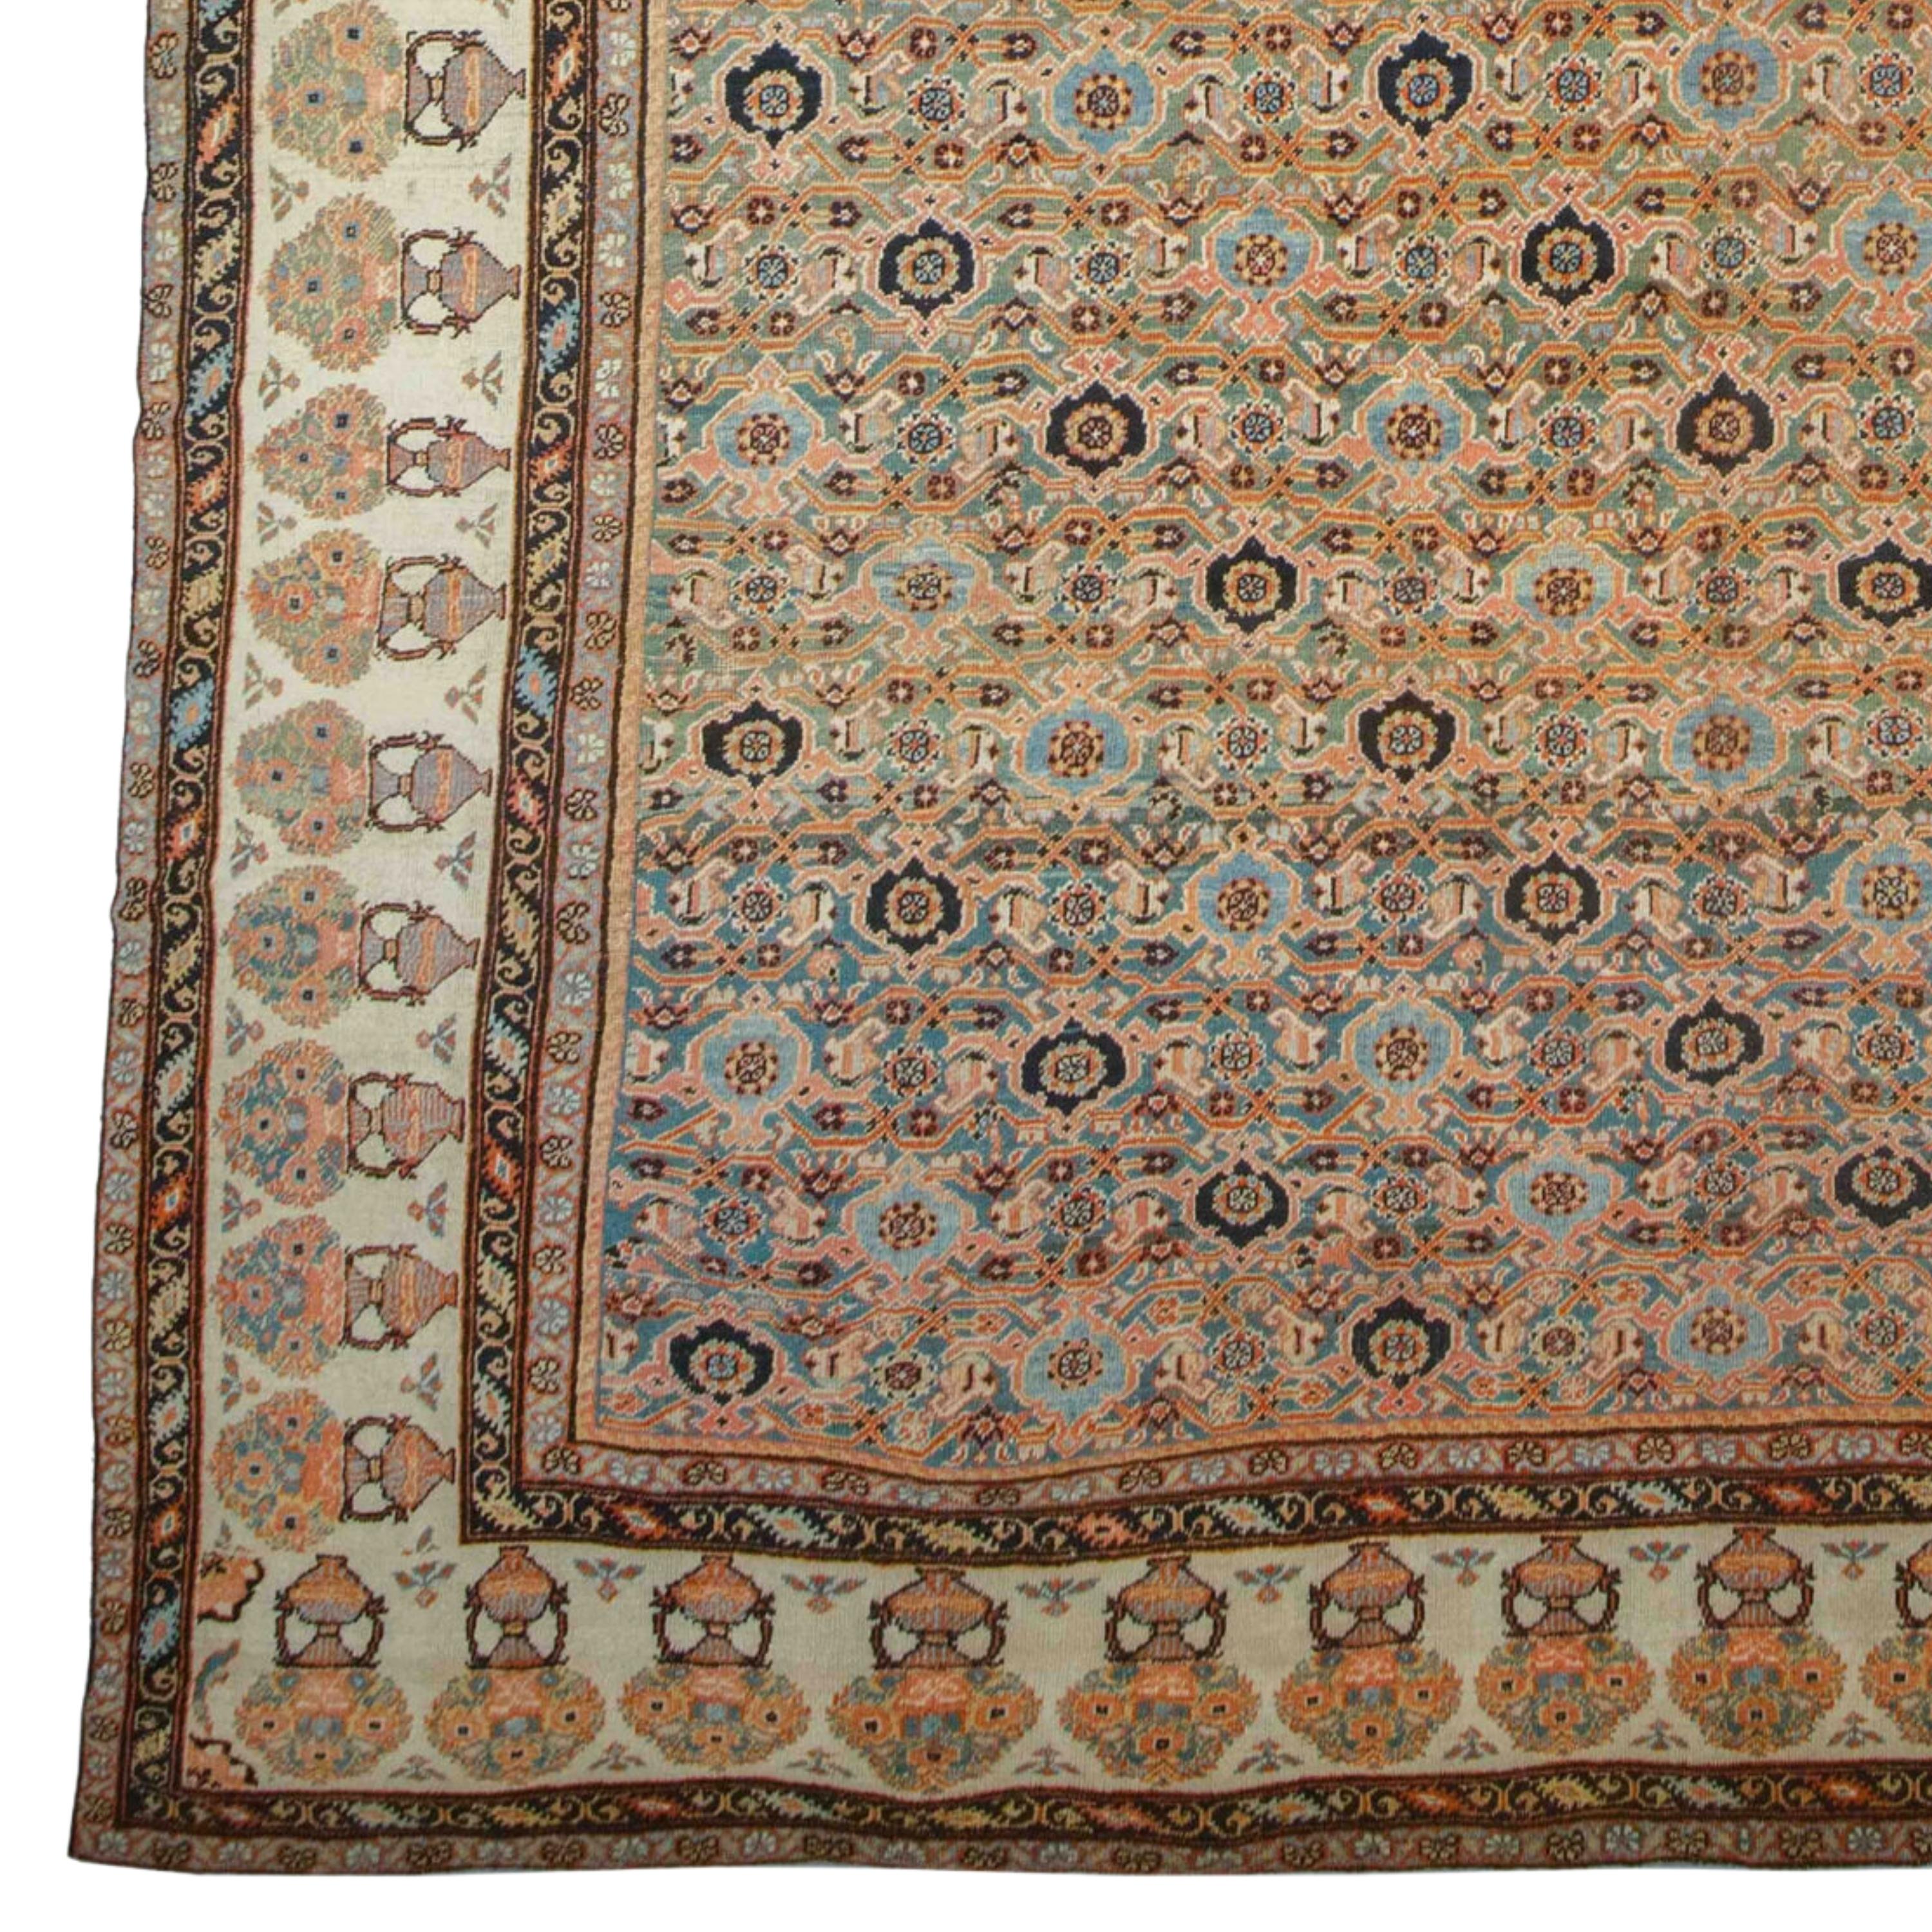 Late of 19th Century Mahal Rug
Size: 380x500 cm

This impressive late 19th century Mahal Carpet is a masterpiece reflecting the elegant and sophisticated craftsmanship of a historic period.

Rich Patterns: The carpet is decorated with intricate